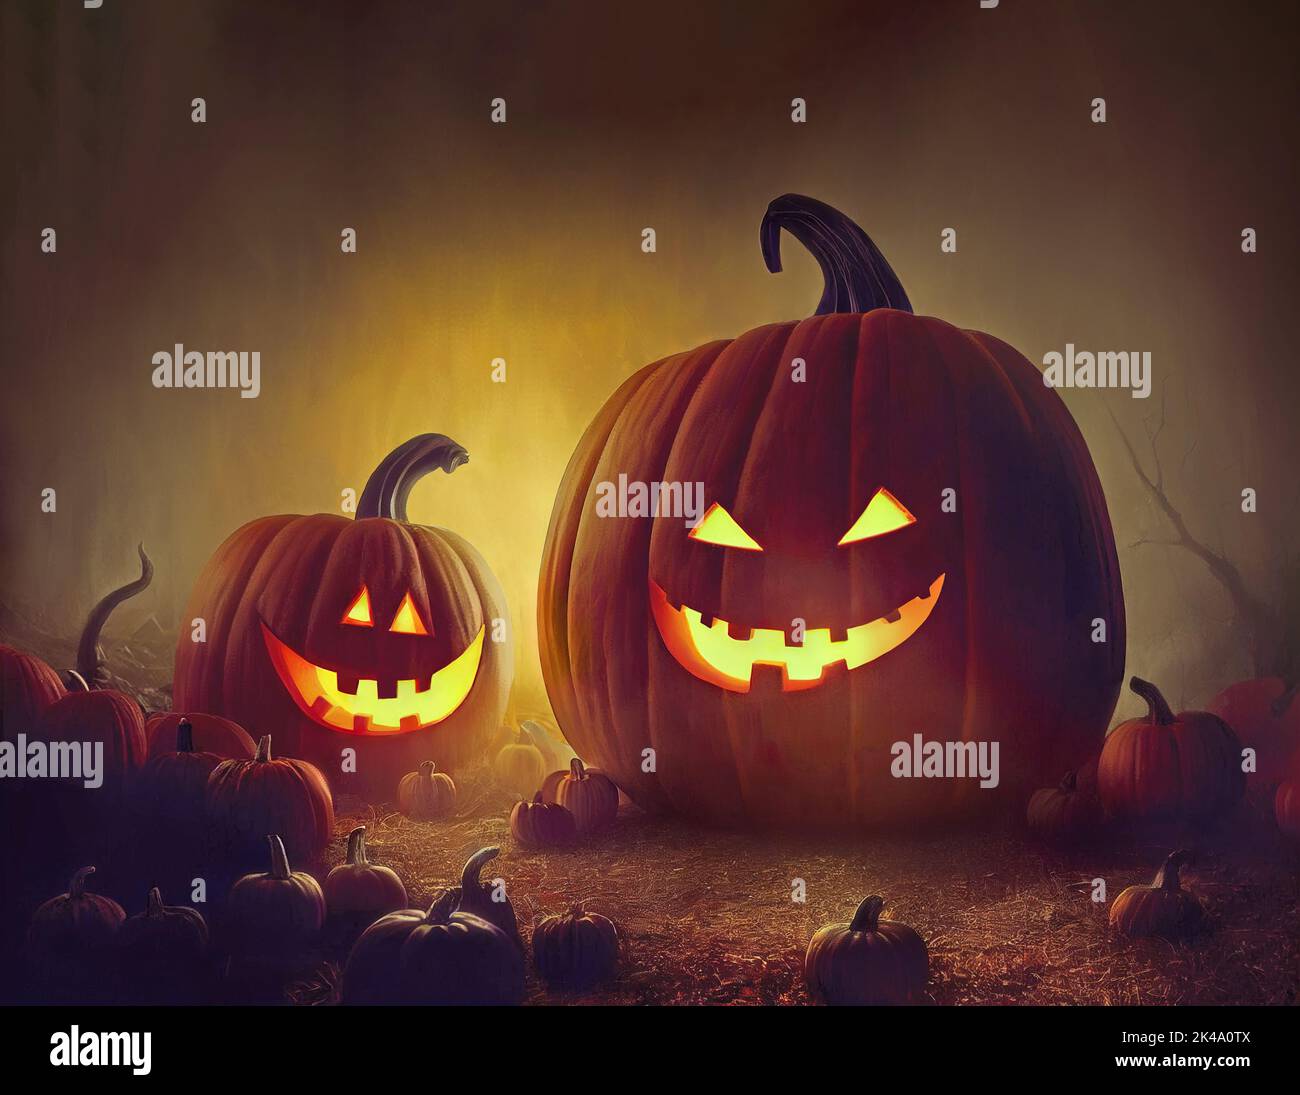 Two scary Halloween pumpkins with evil grins in a field. Digital illustration with copy space Stock Photo